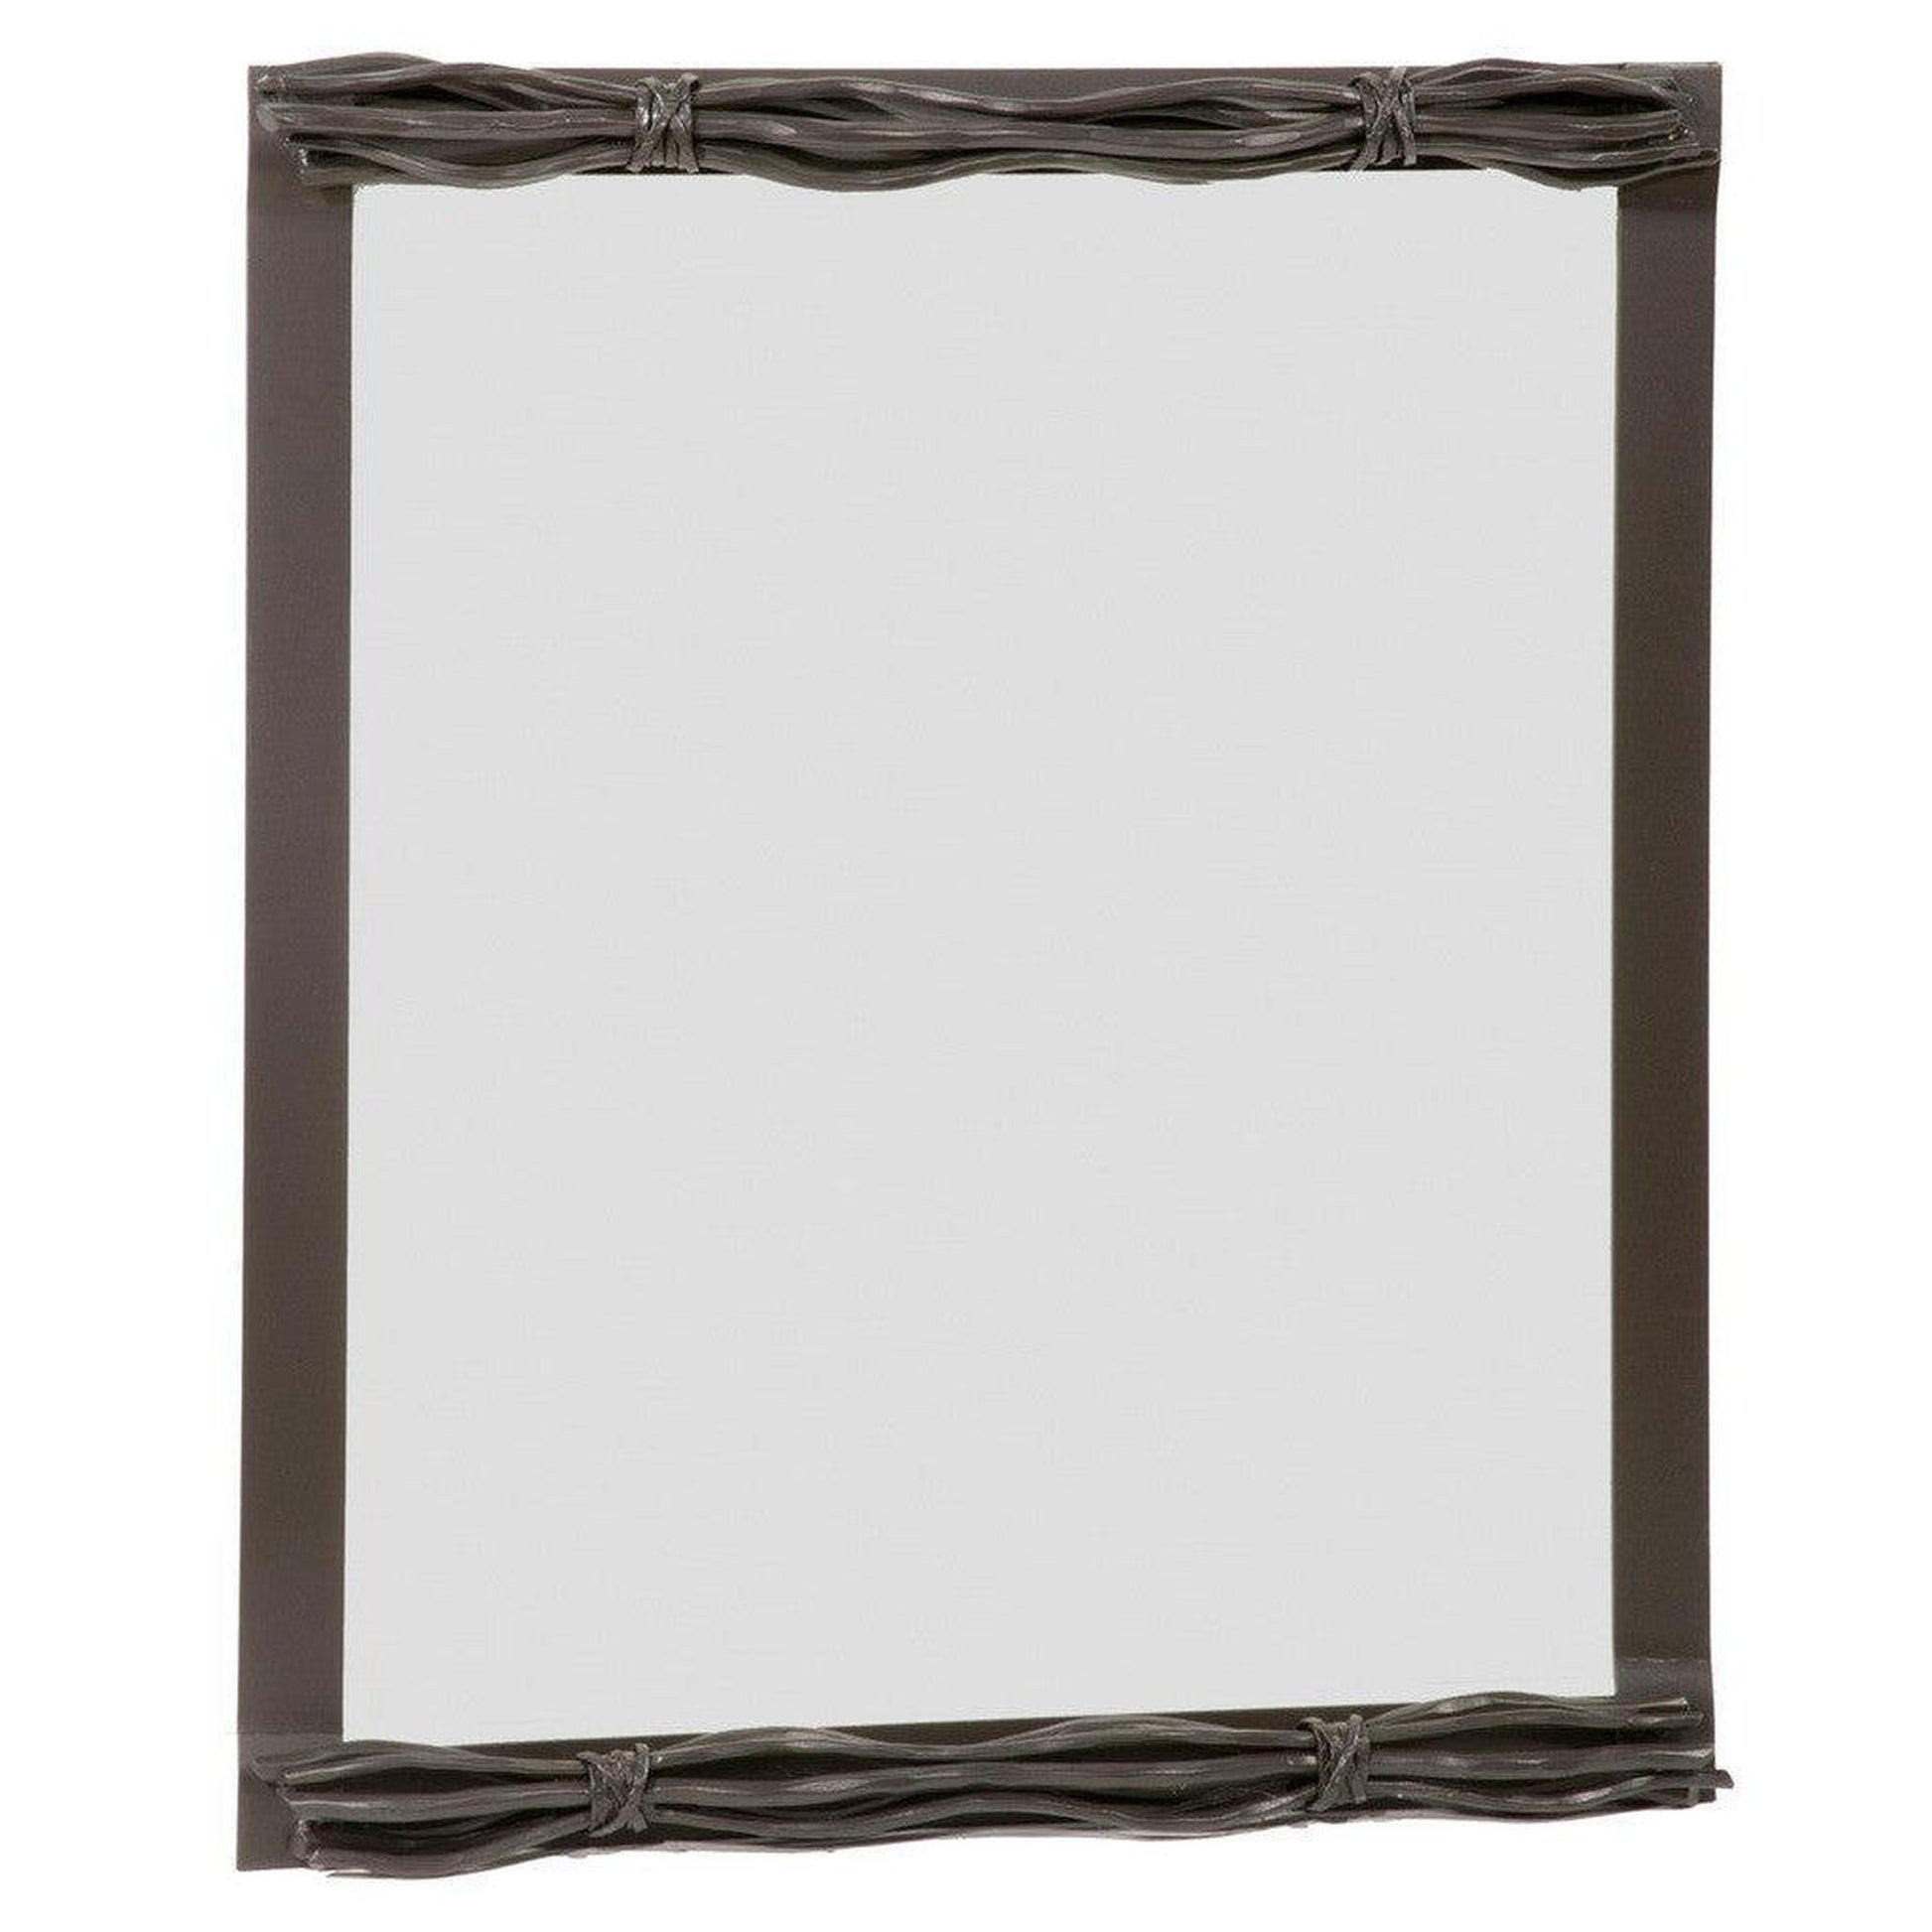 Stone County Ironworks Rush 21" x 26" Small Woodland Brown Iron Wall Mirror With Pewter Iron Accent